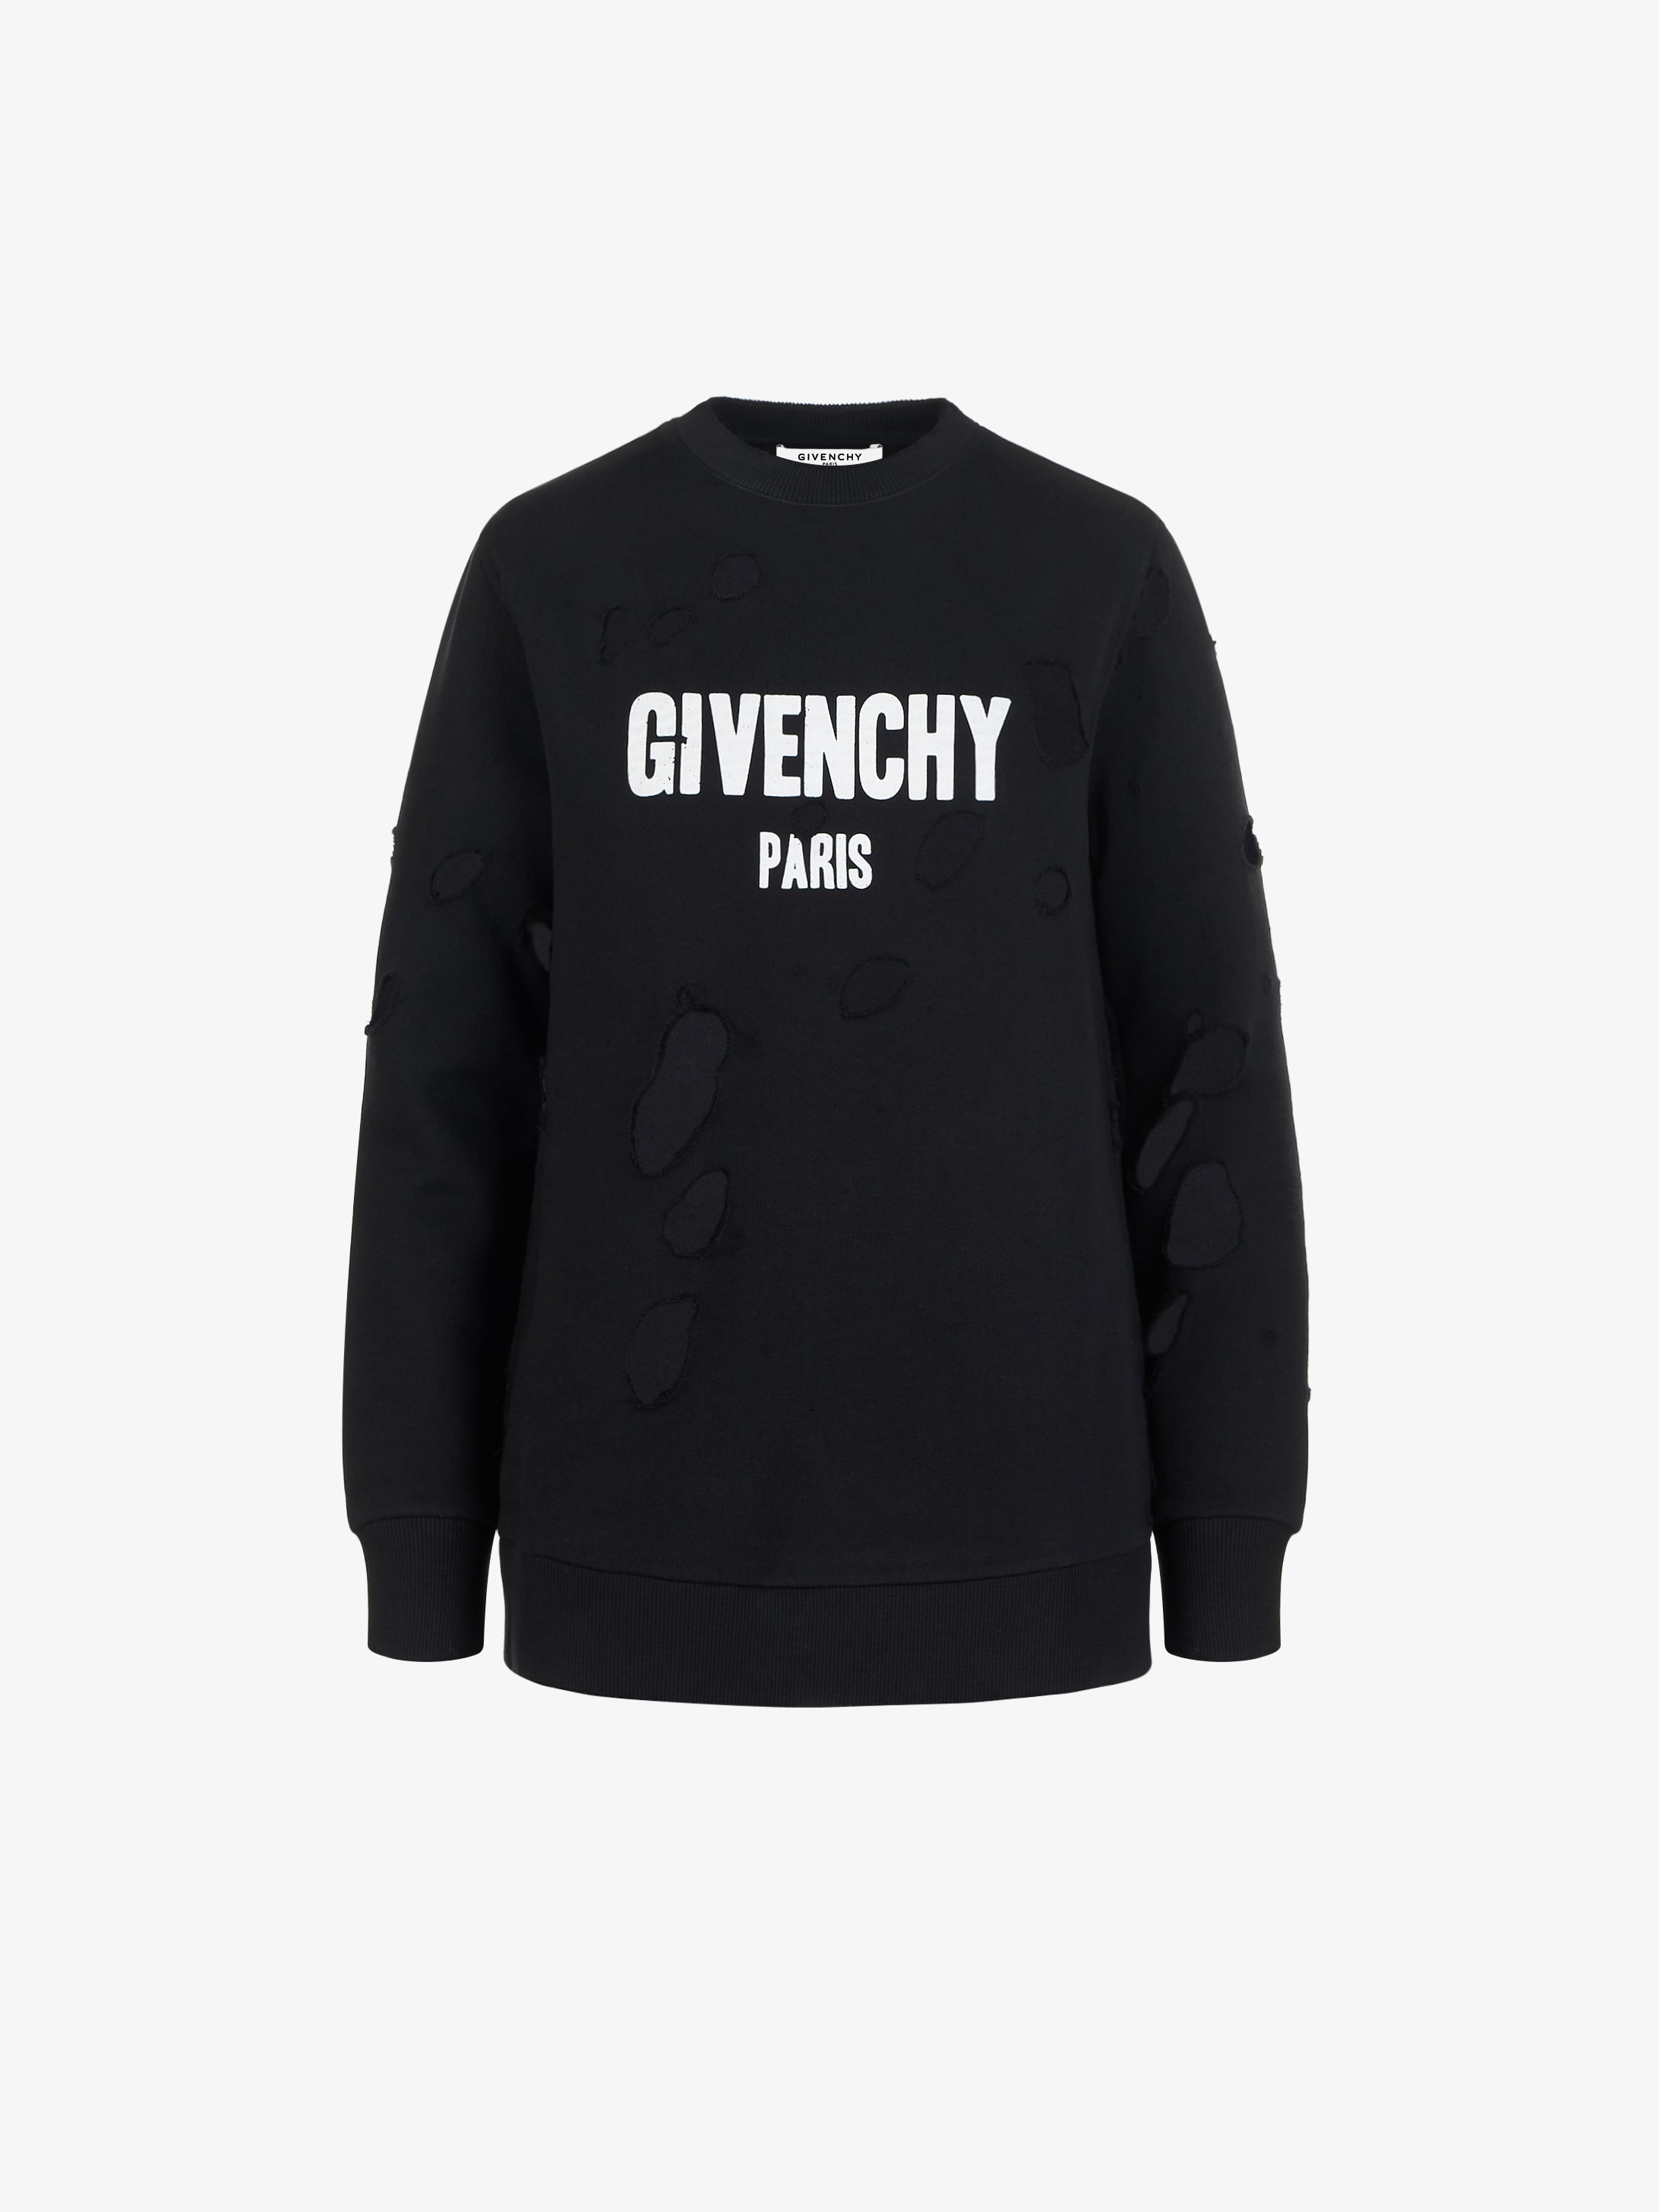 givenchy sweater price